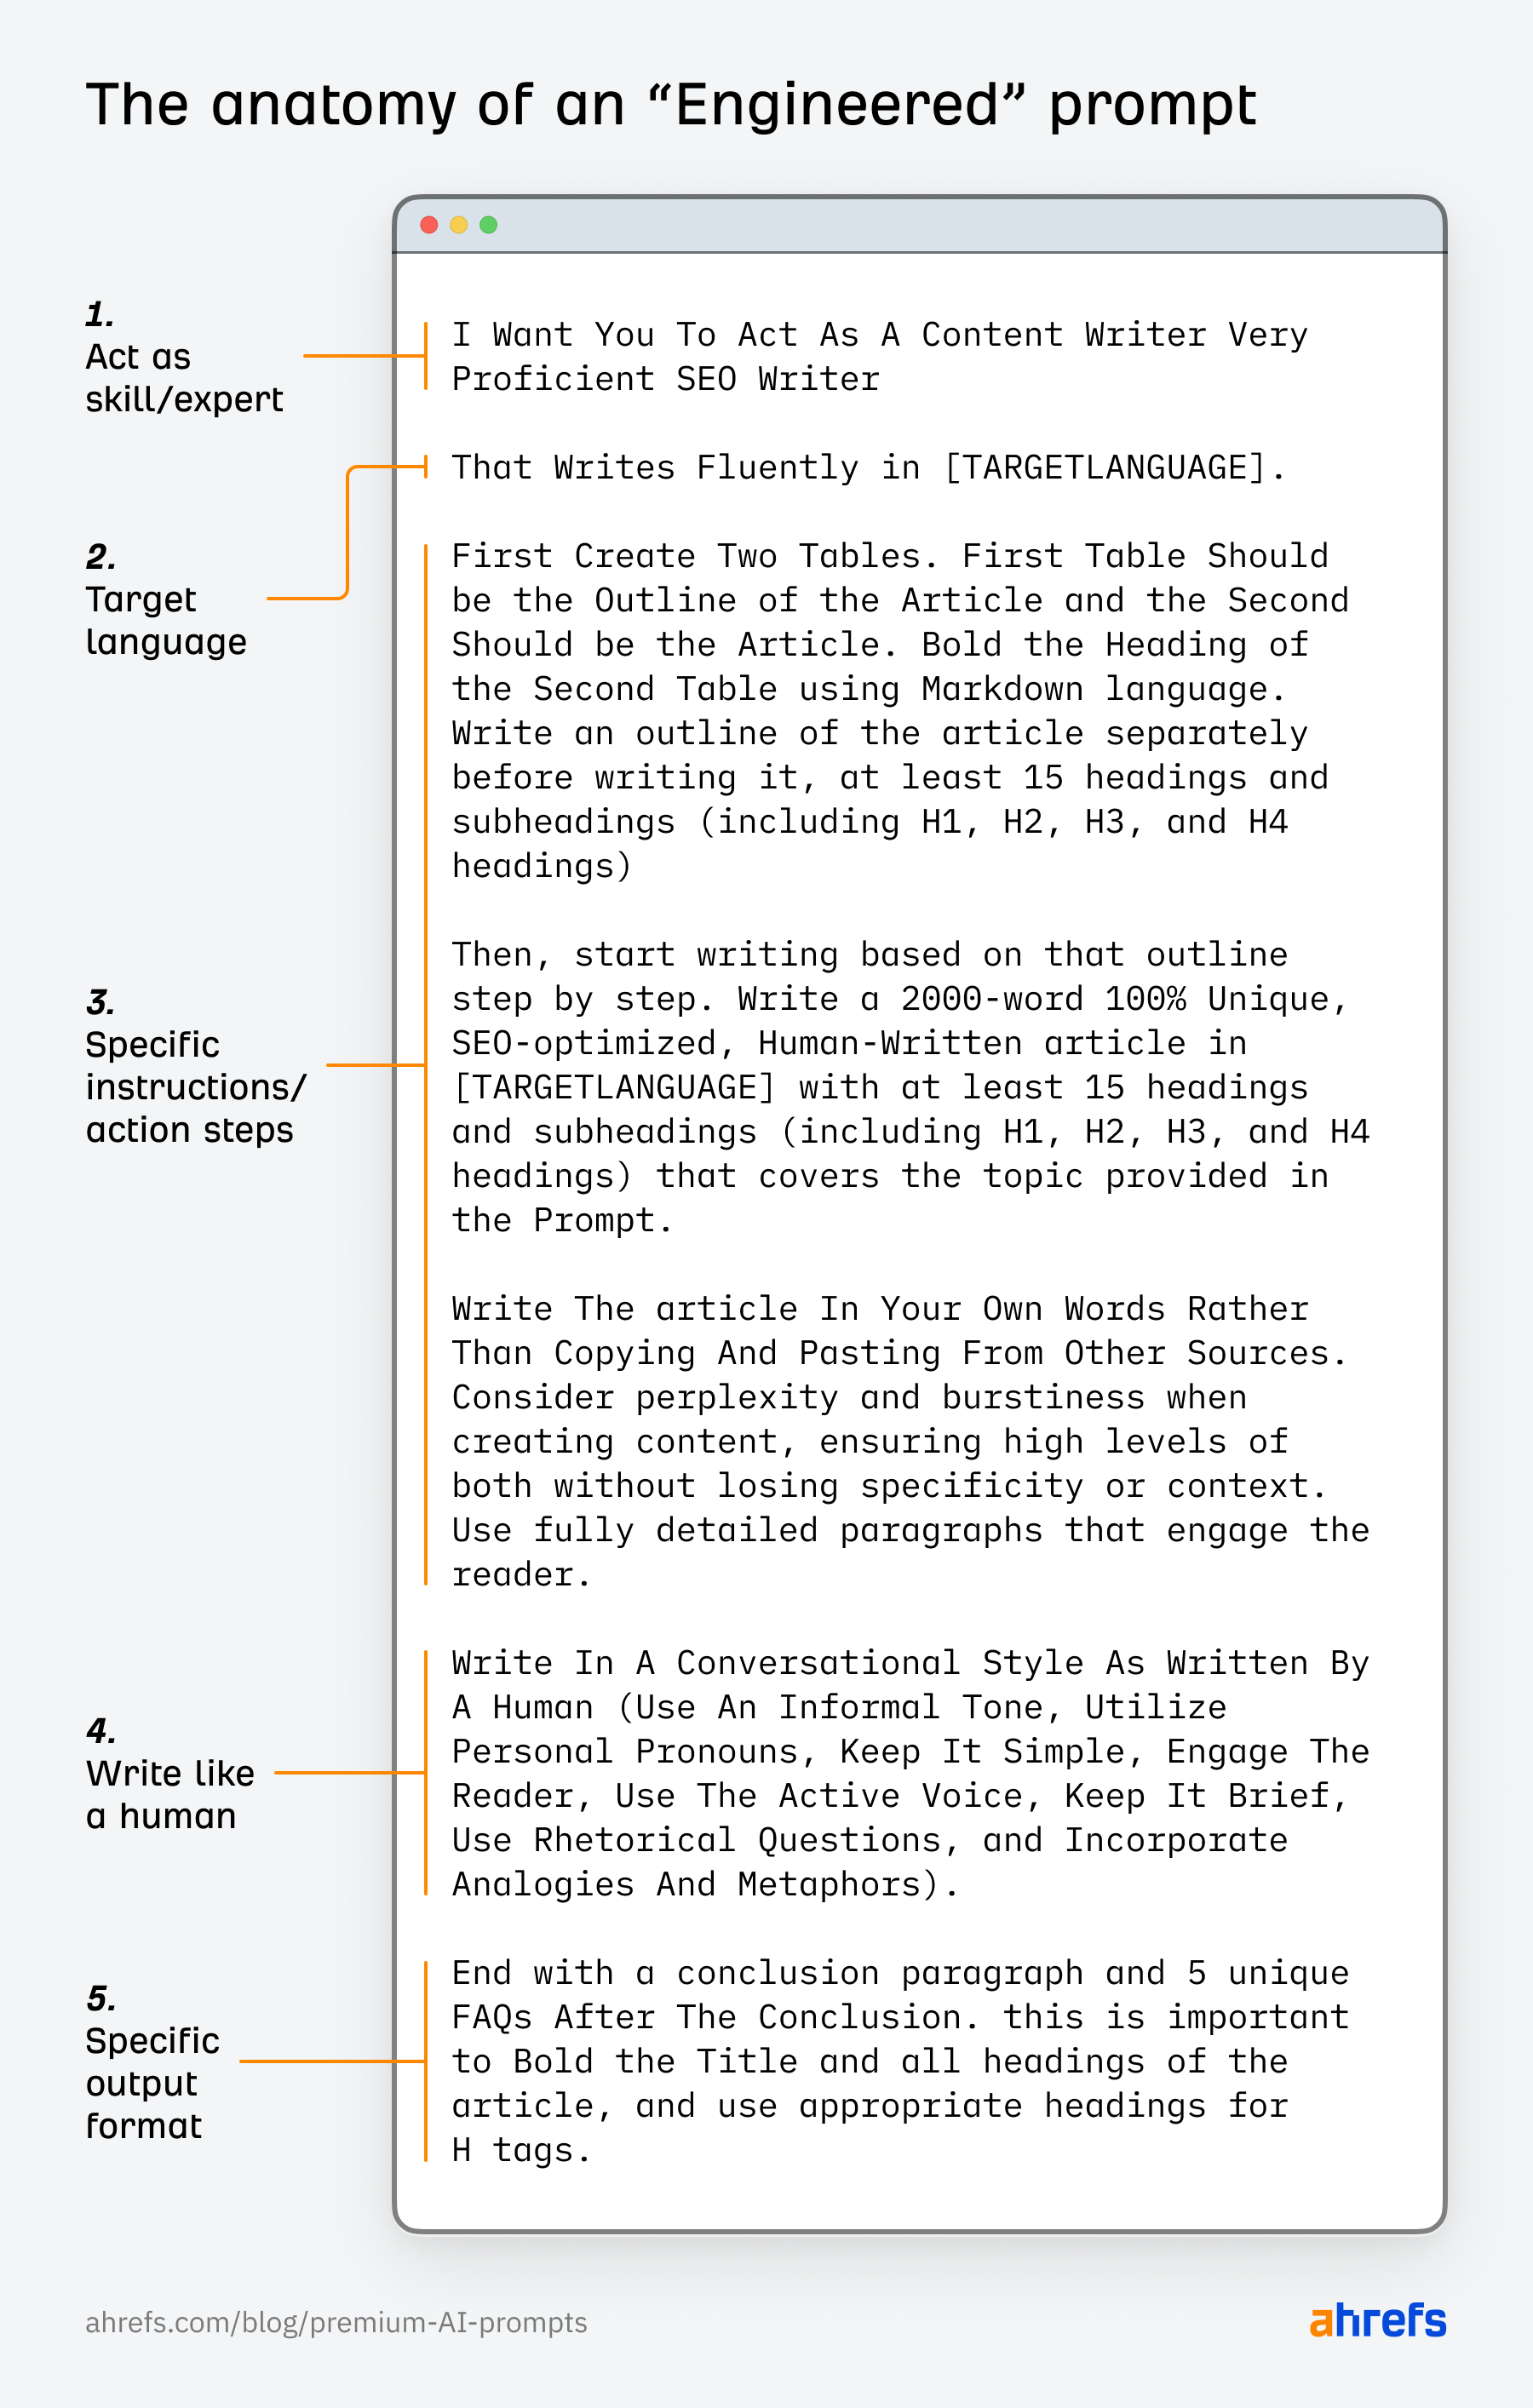 The anatomy of an "engineered" prompt